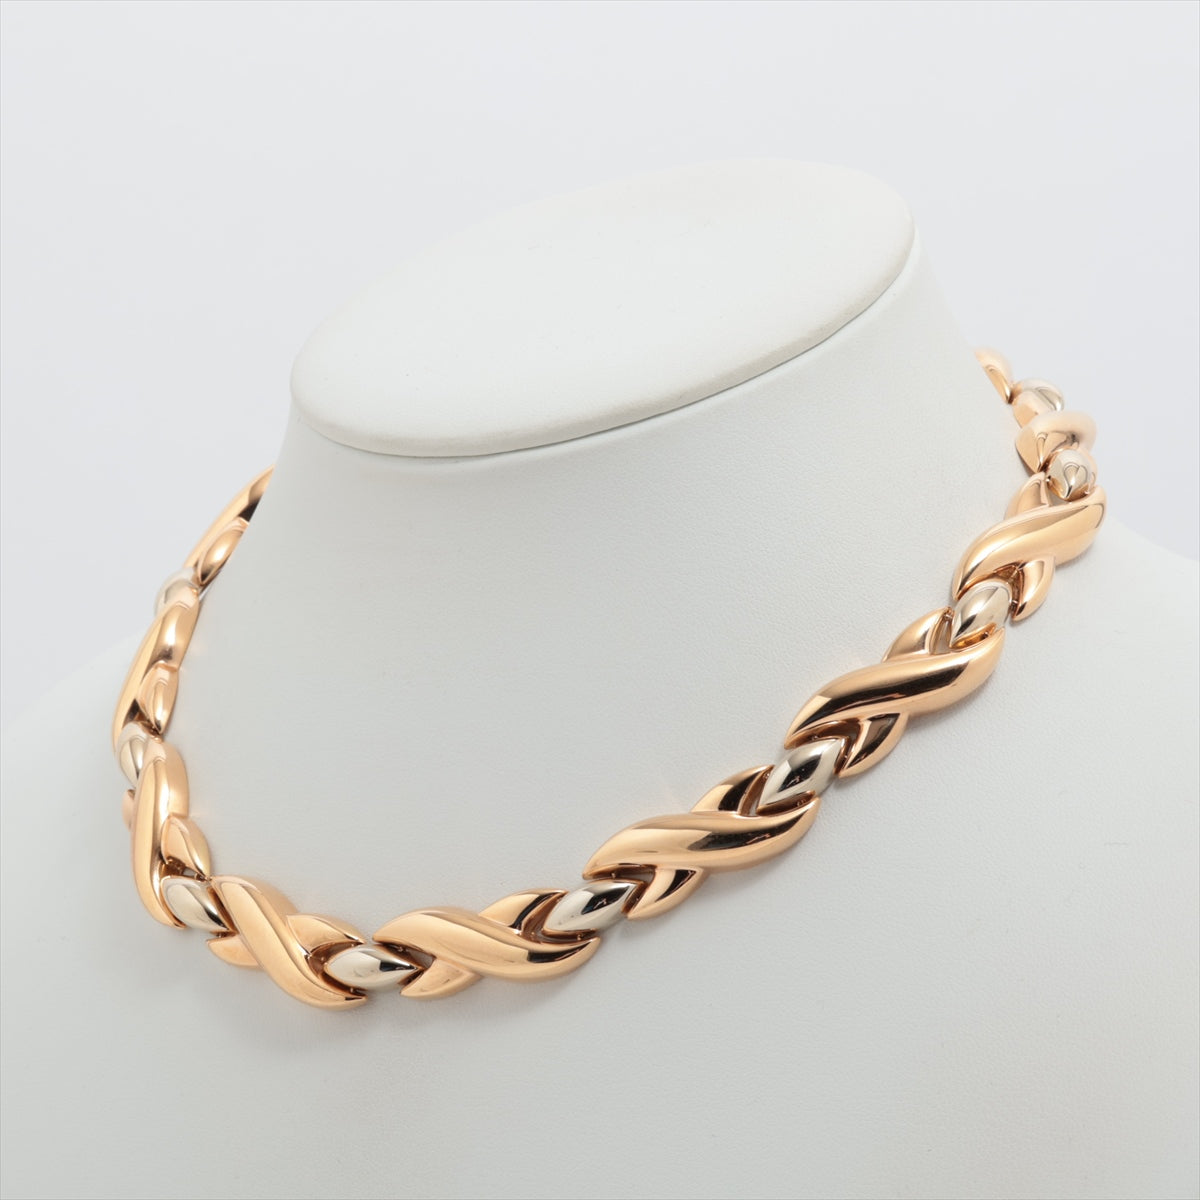 Cartier Alabesk Necklace 750 (PGWG) 58.2g